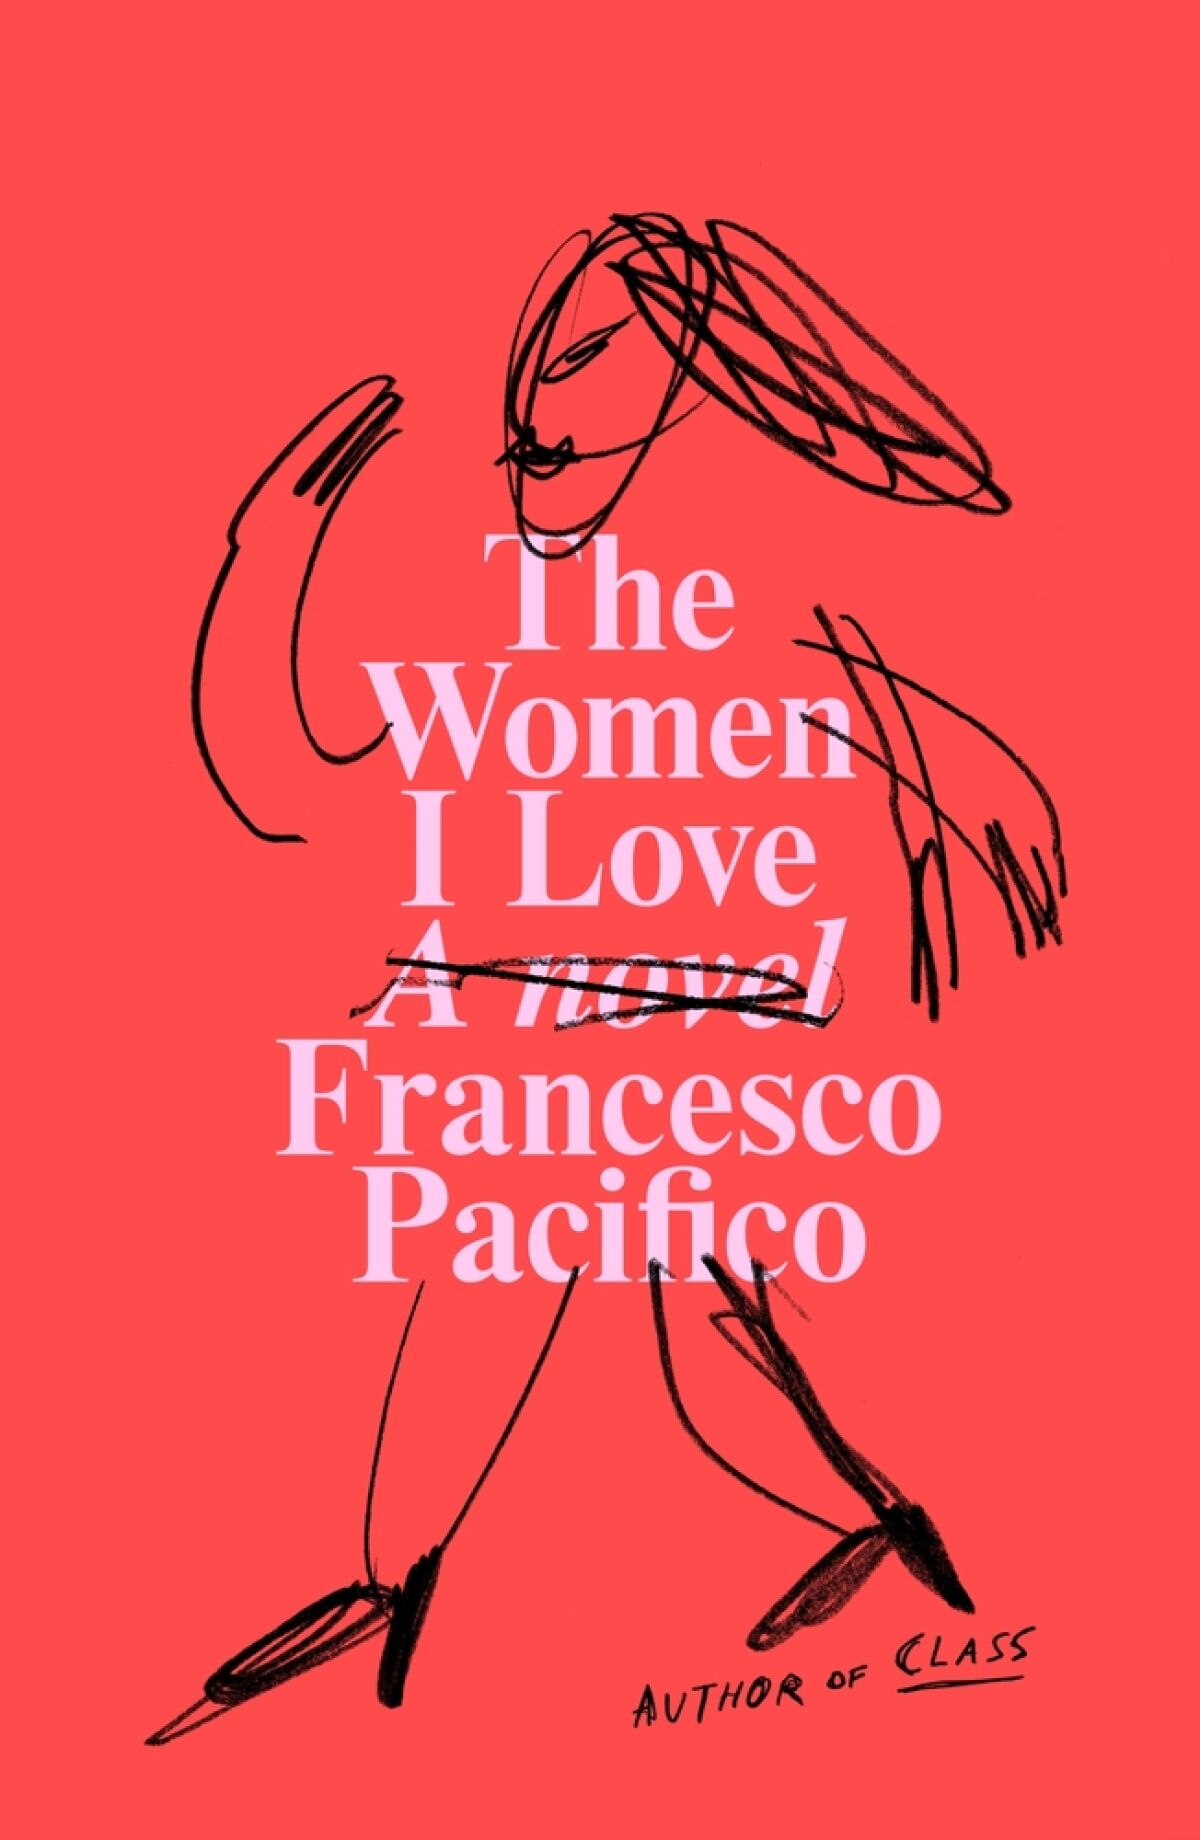 "The Women I Love," by Francesco Pacifico